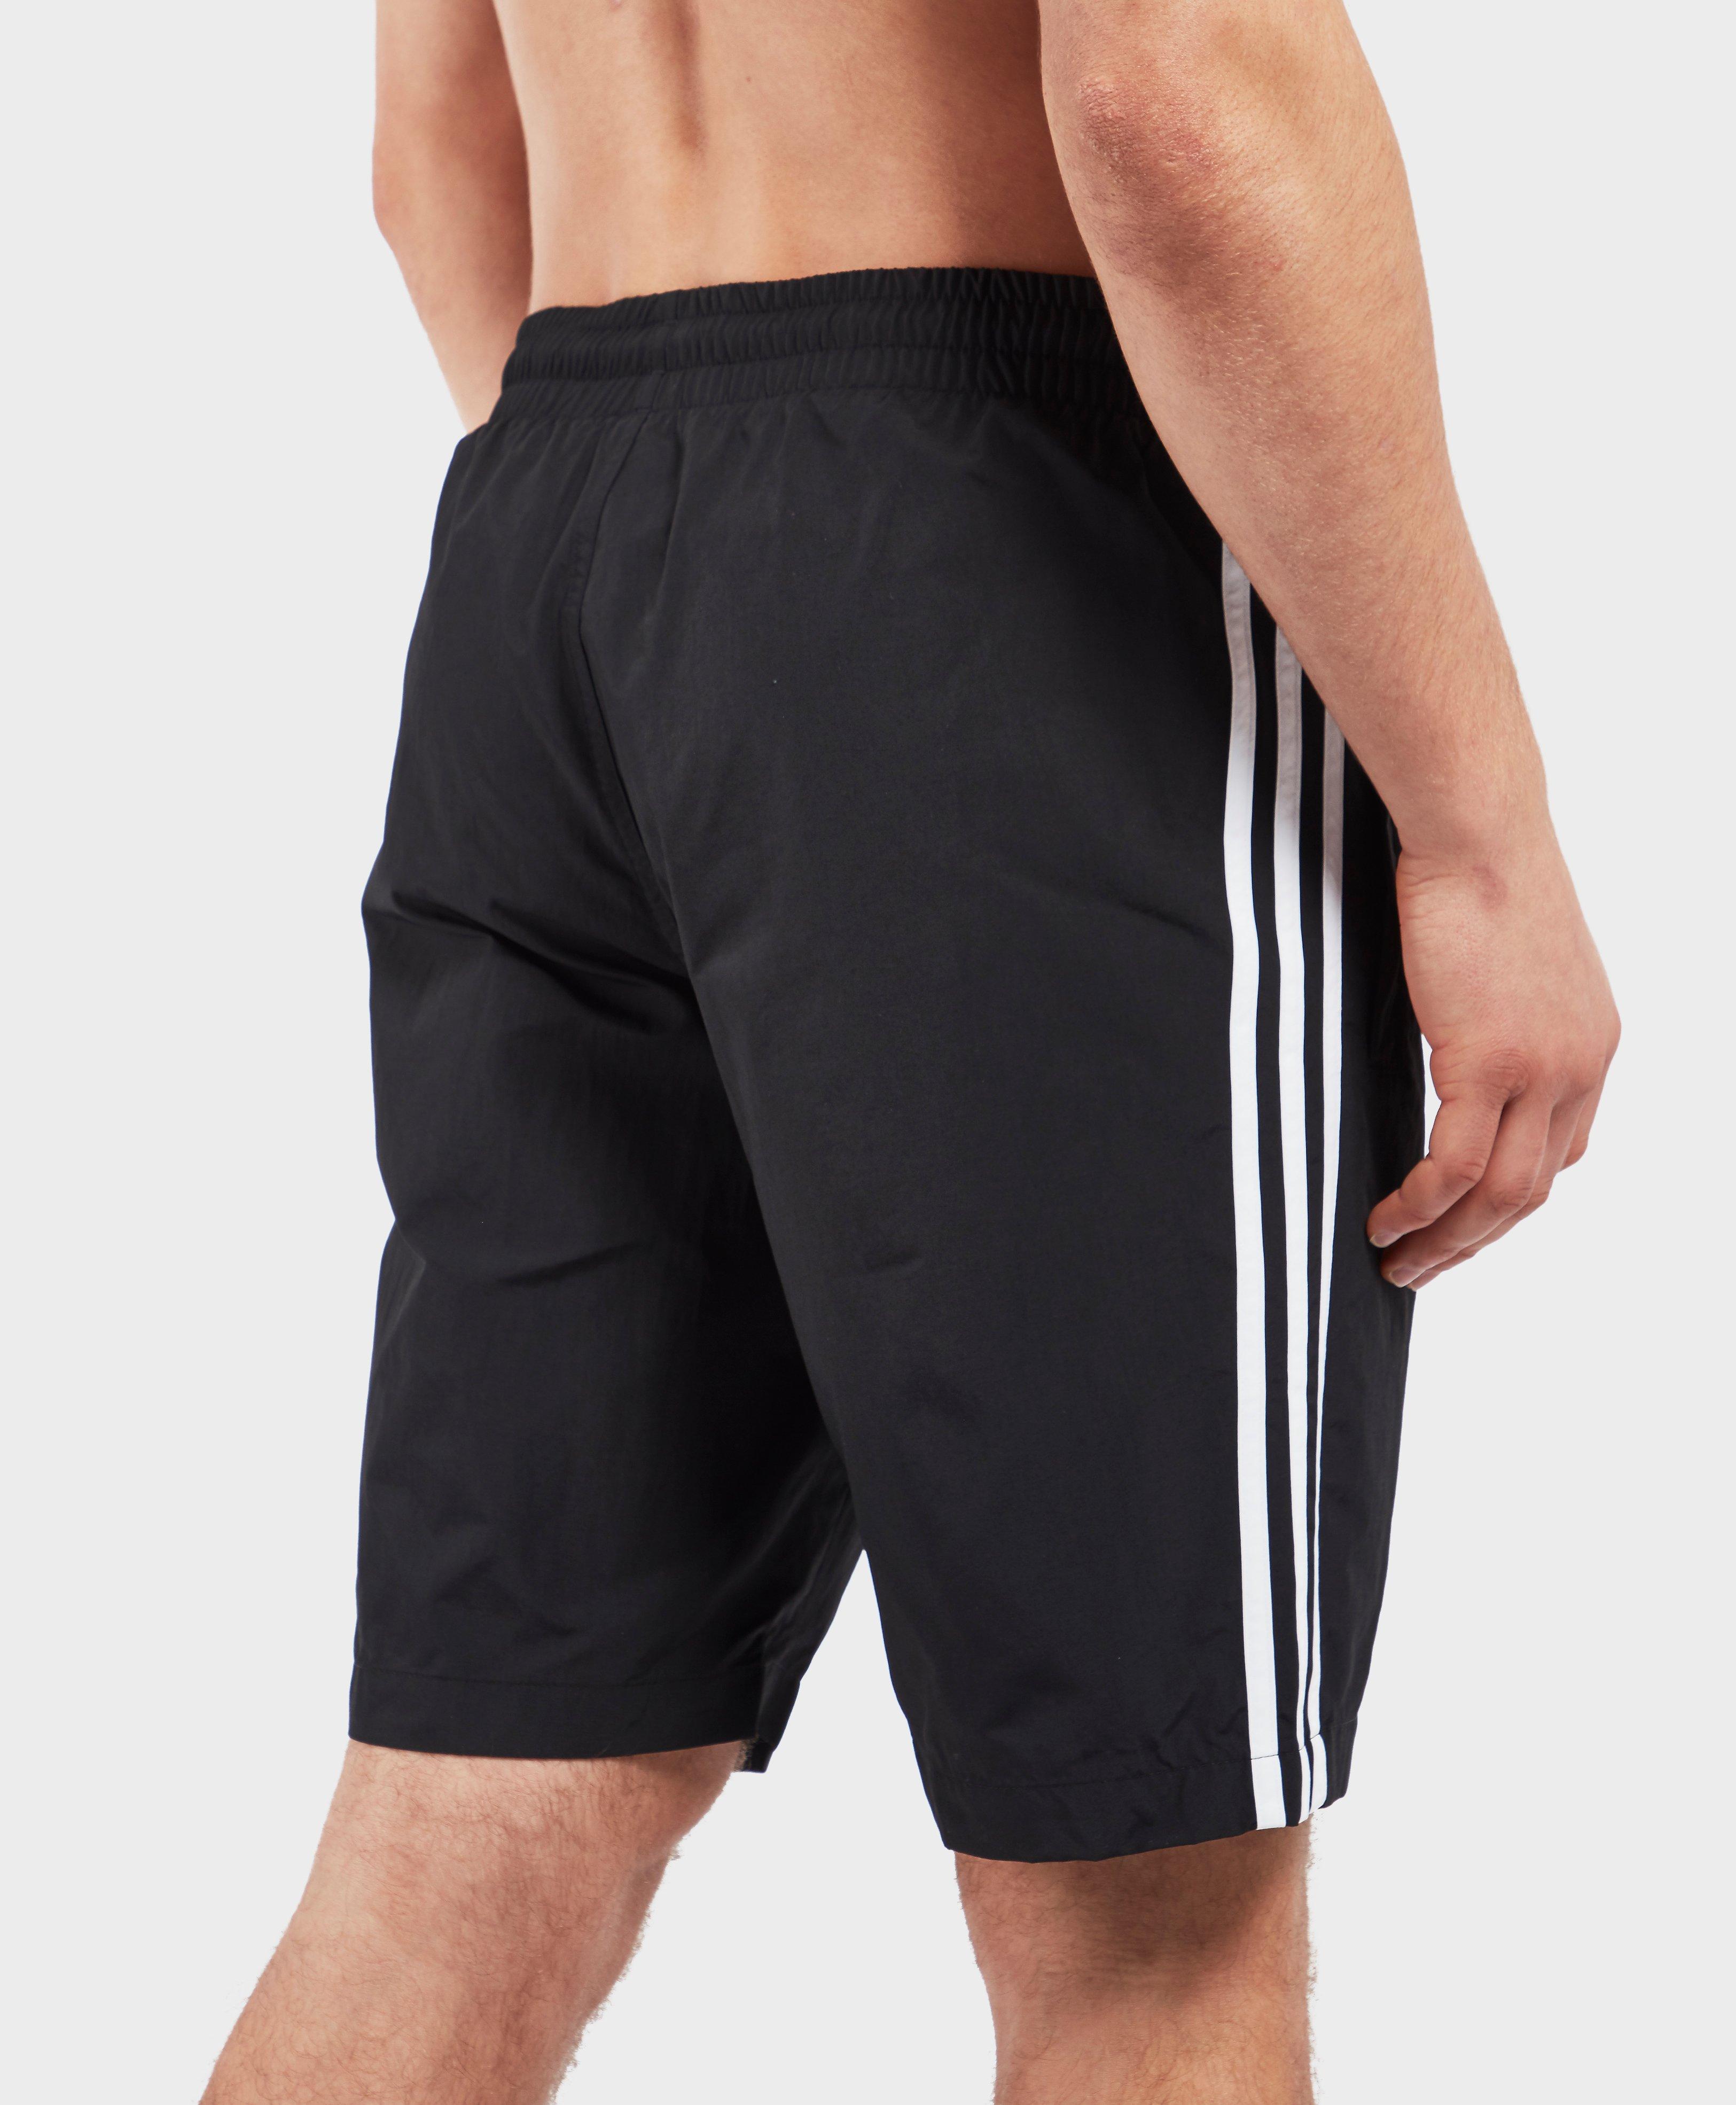 adidas Originals Synthetic 3-stripes Swim Shorts in Black for Men - Save  31% - Lyst